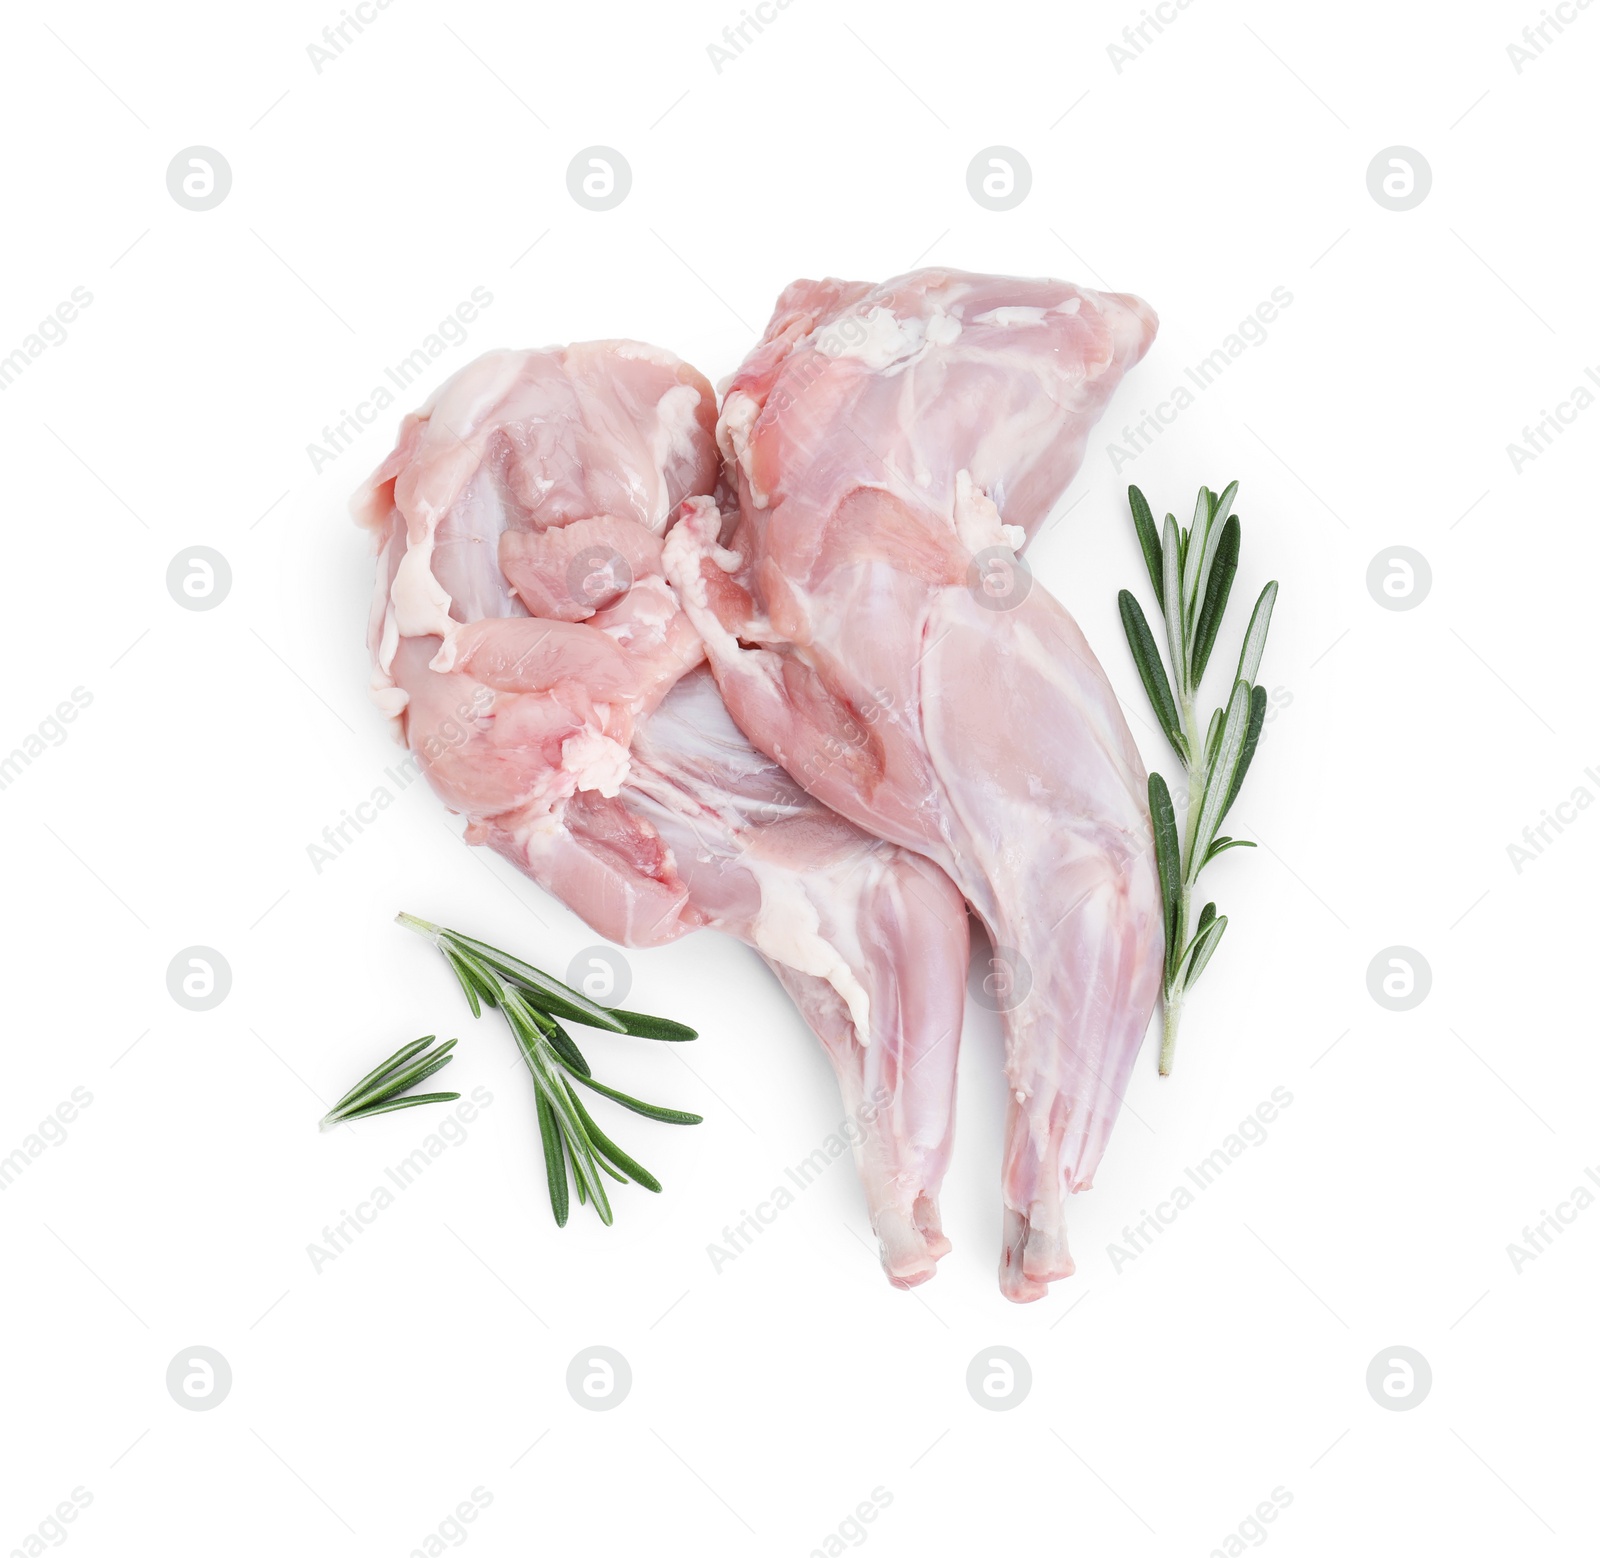 Photo of Fresh raw rabbit legs and rosemary isolated on white, top view